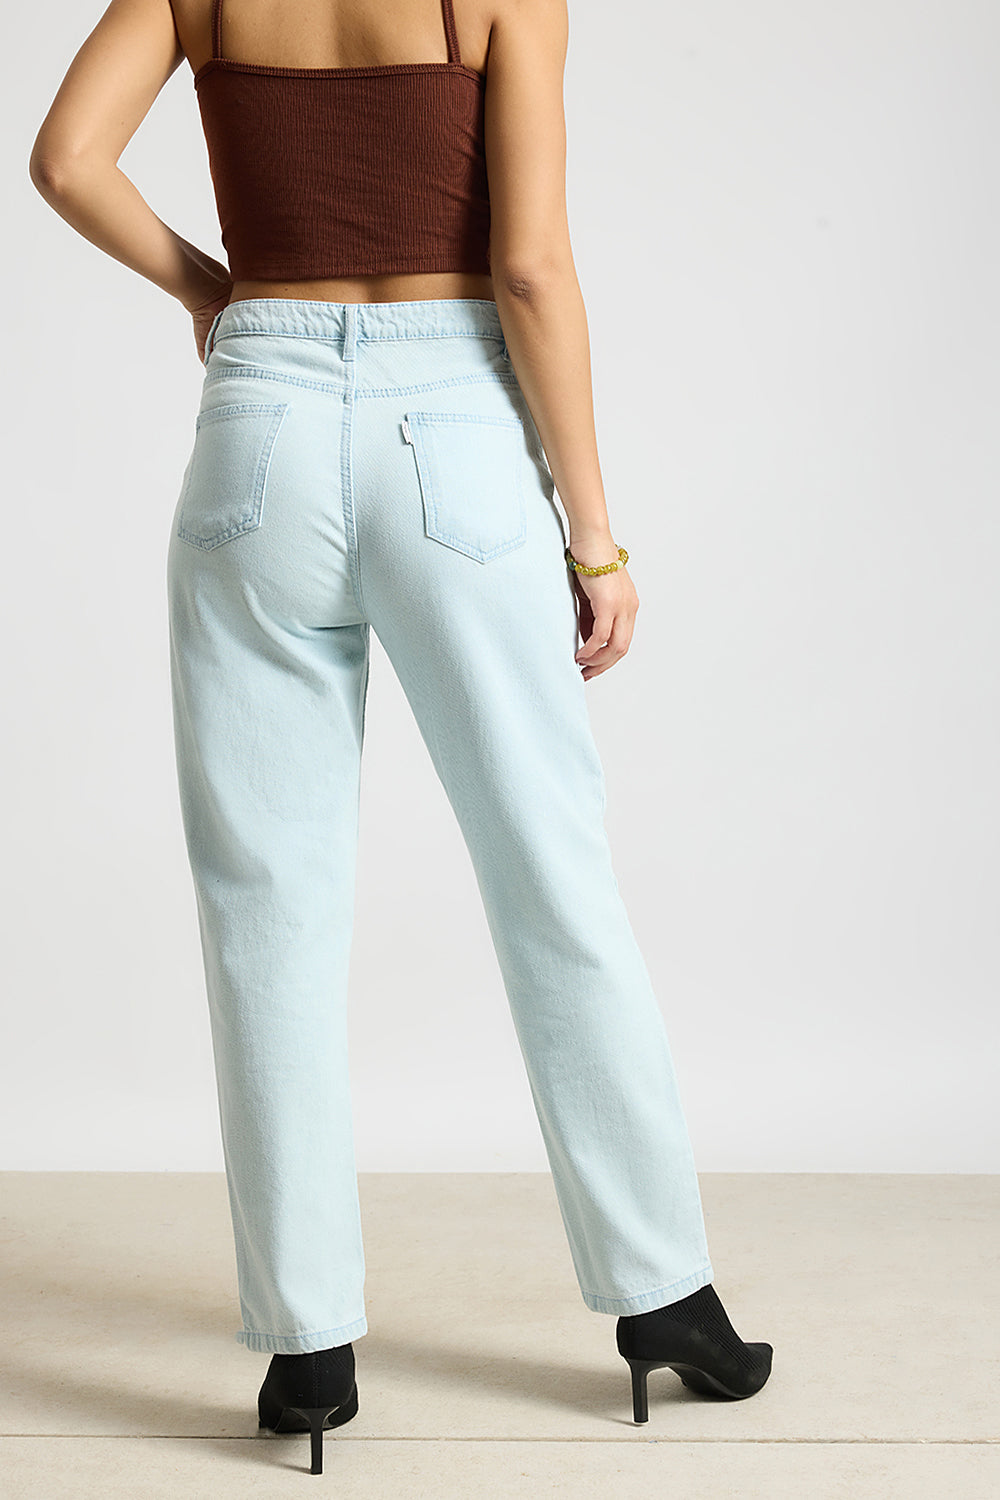 HEAVENLY HIGH WAIST MOM FIT JEANS